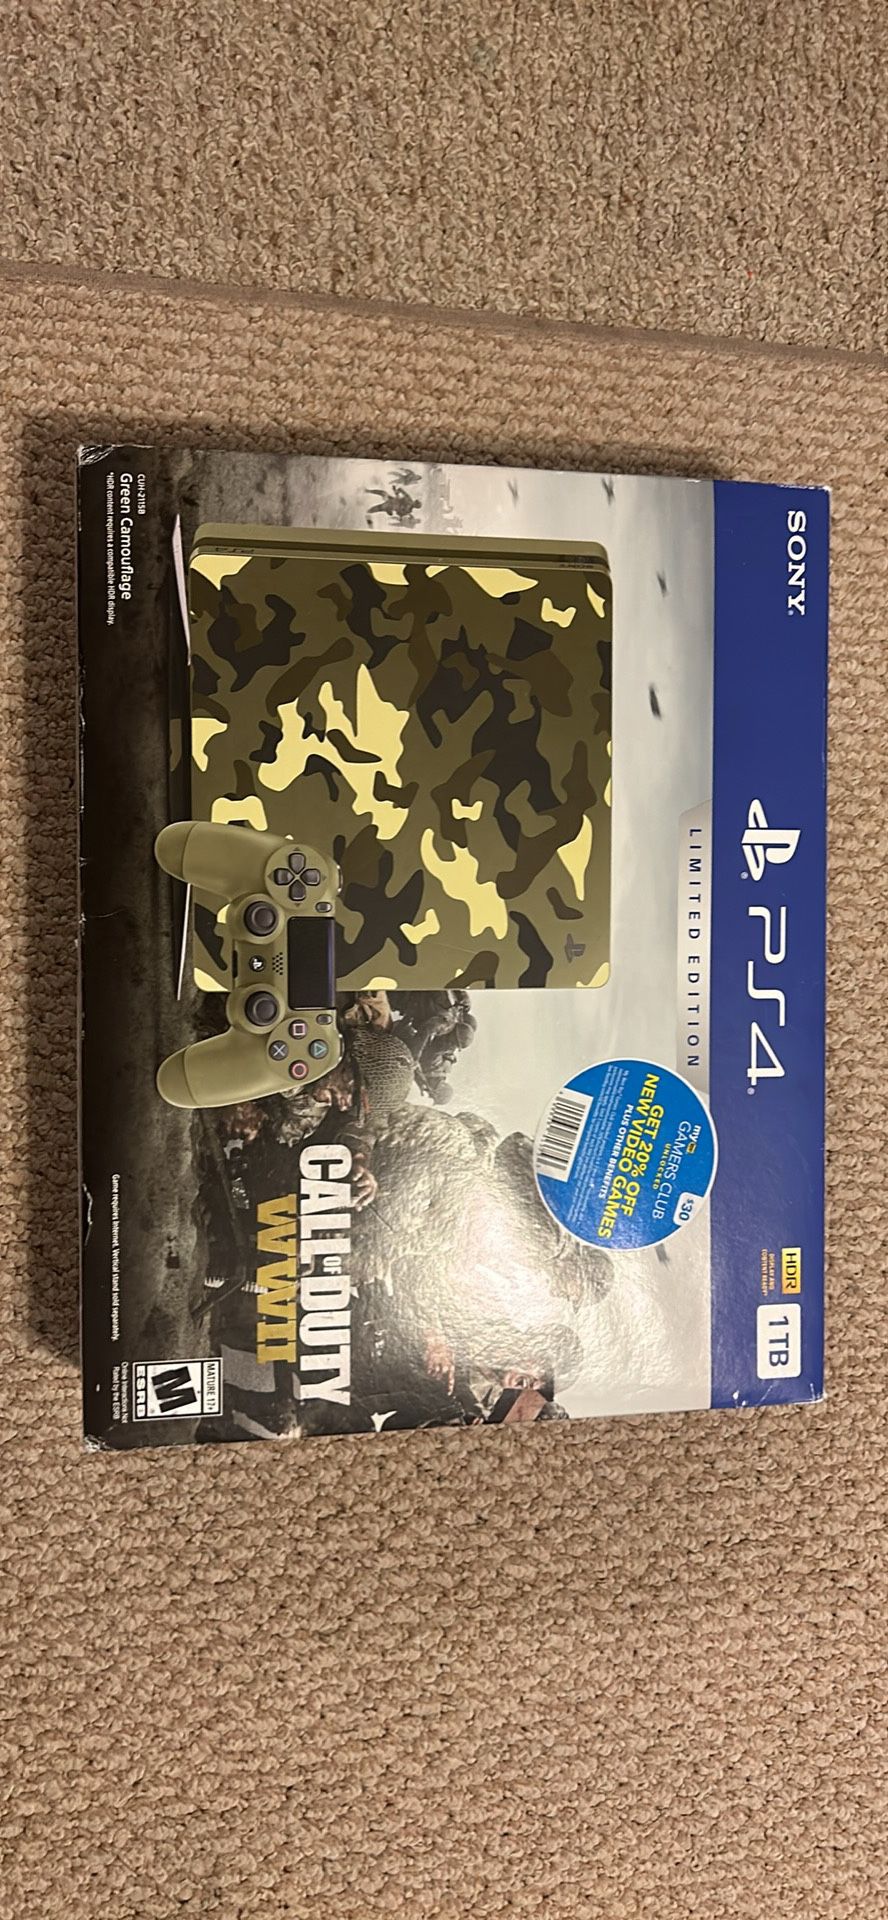 ww2 ps4 (includes 2 controllers)